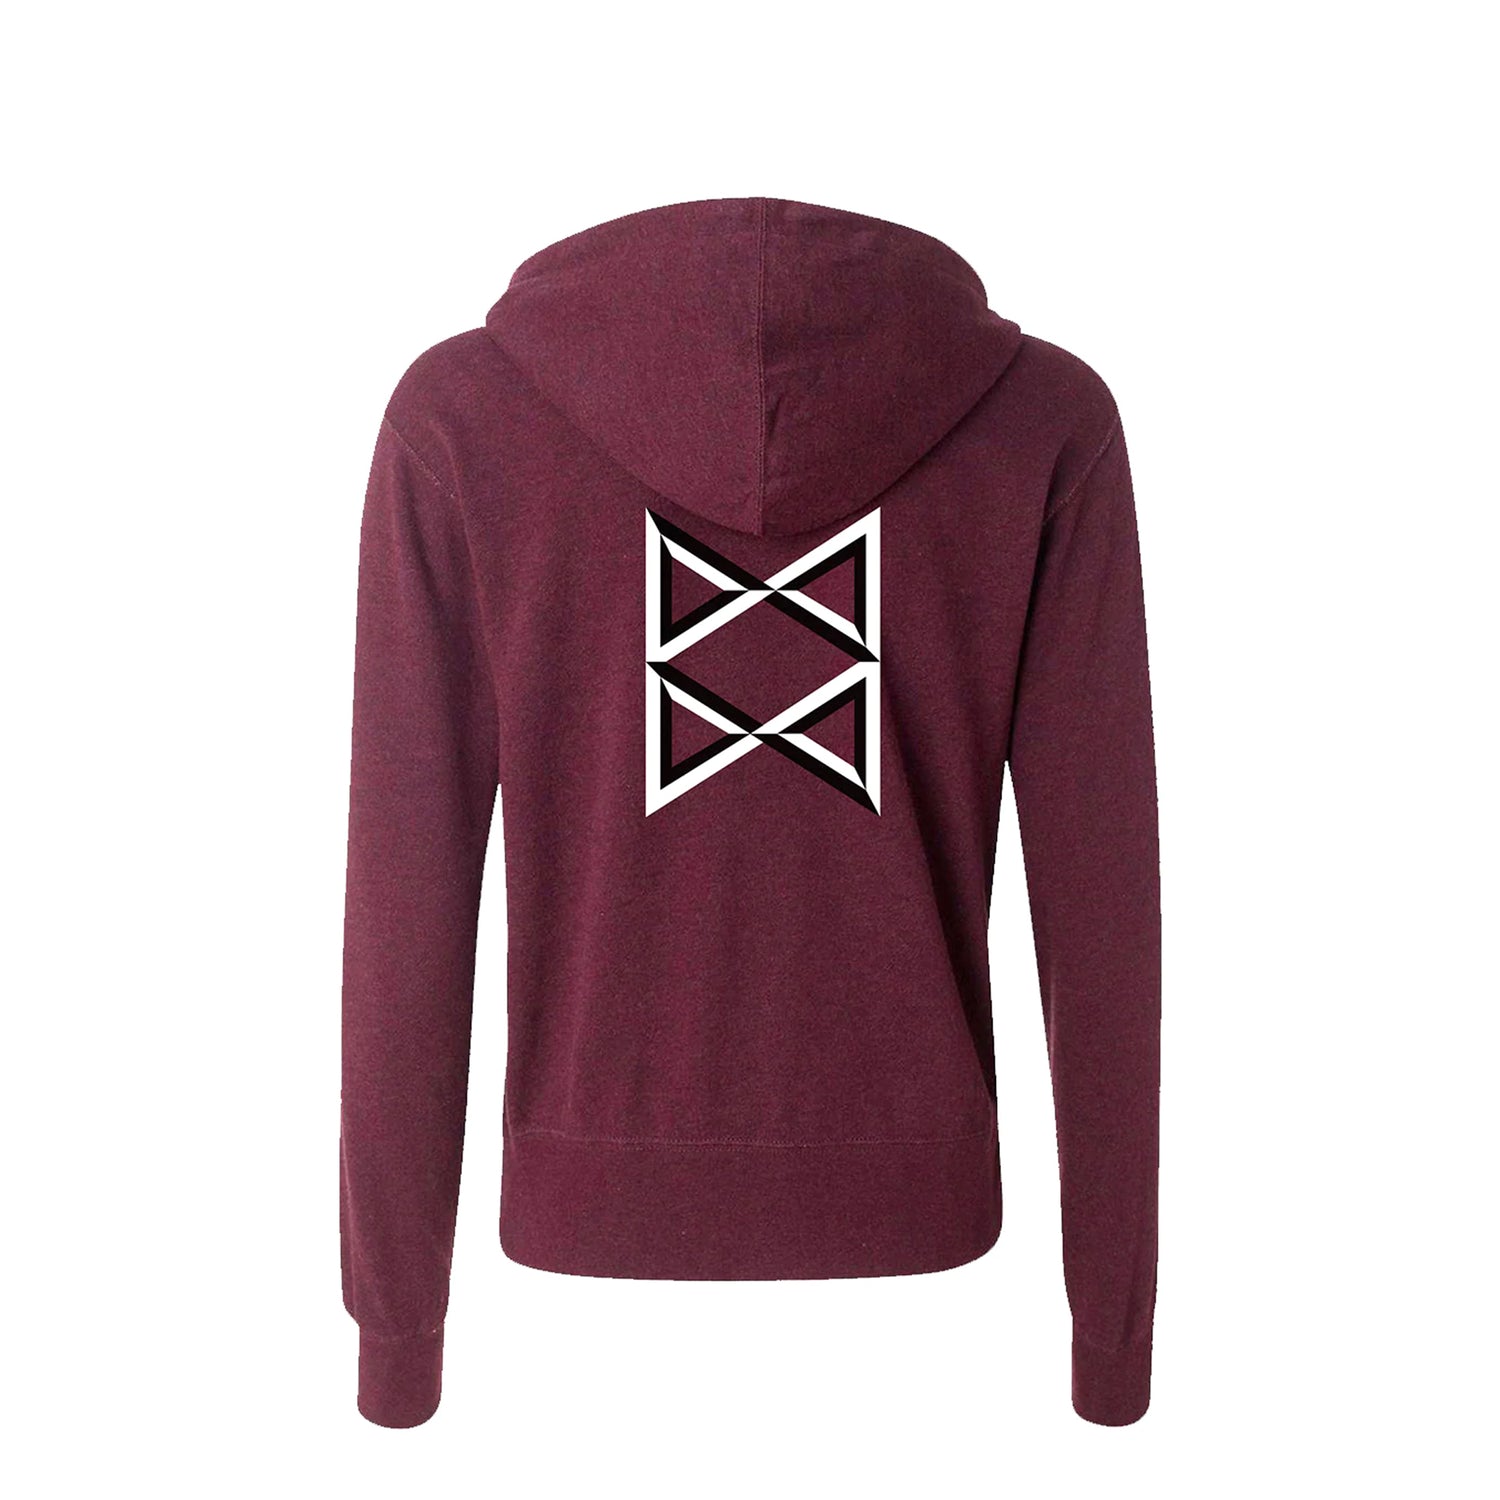 The back of a heathered burgundy sweatshirt with the B.o.B. emblem in white and black.